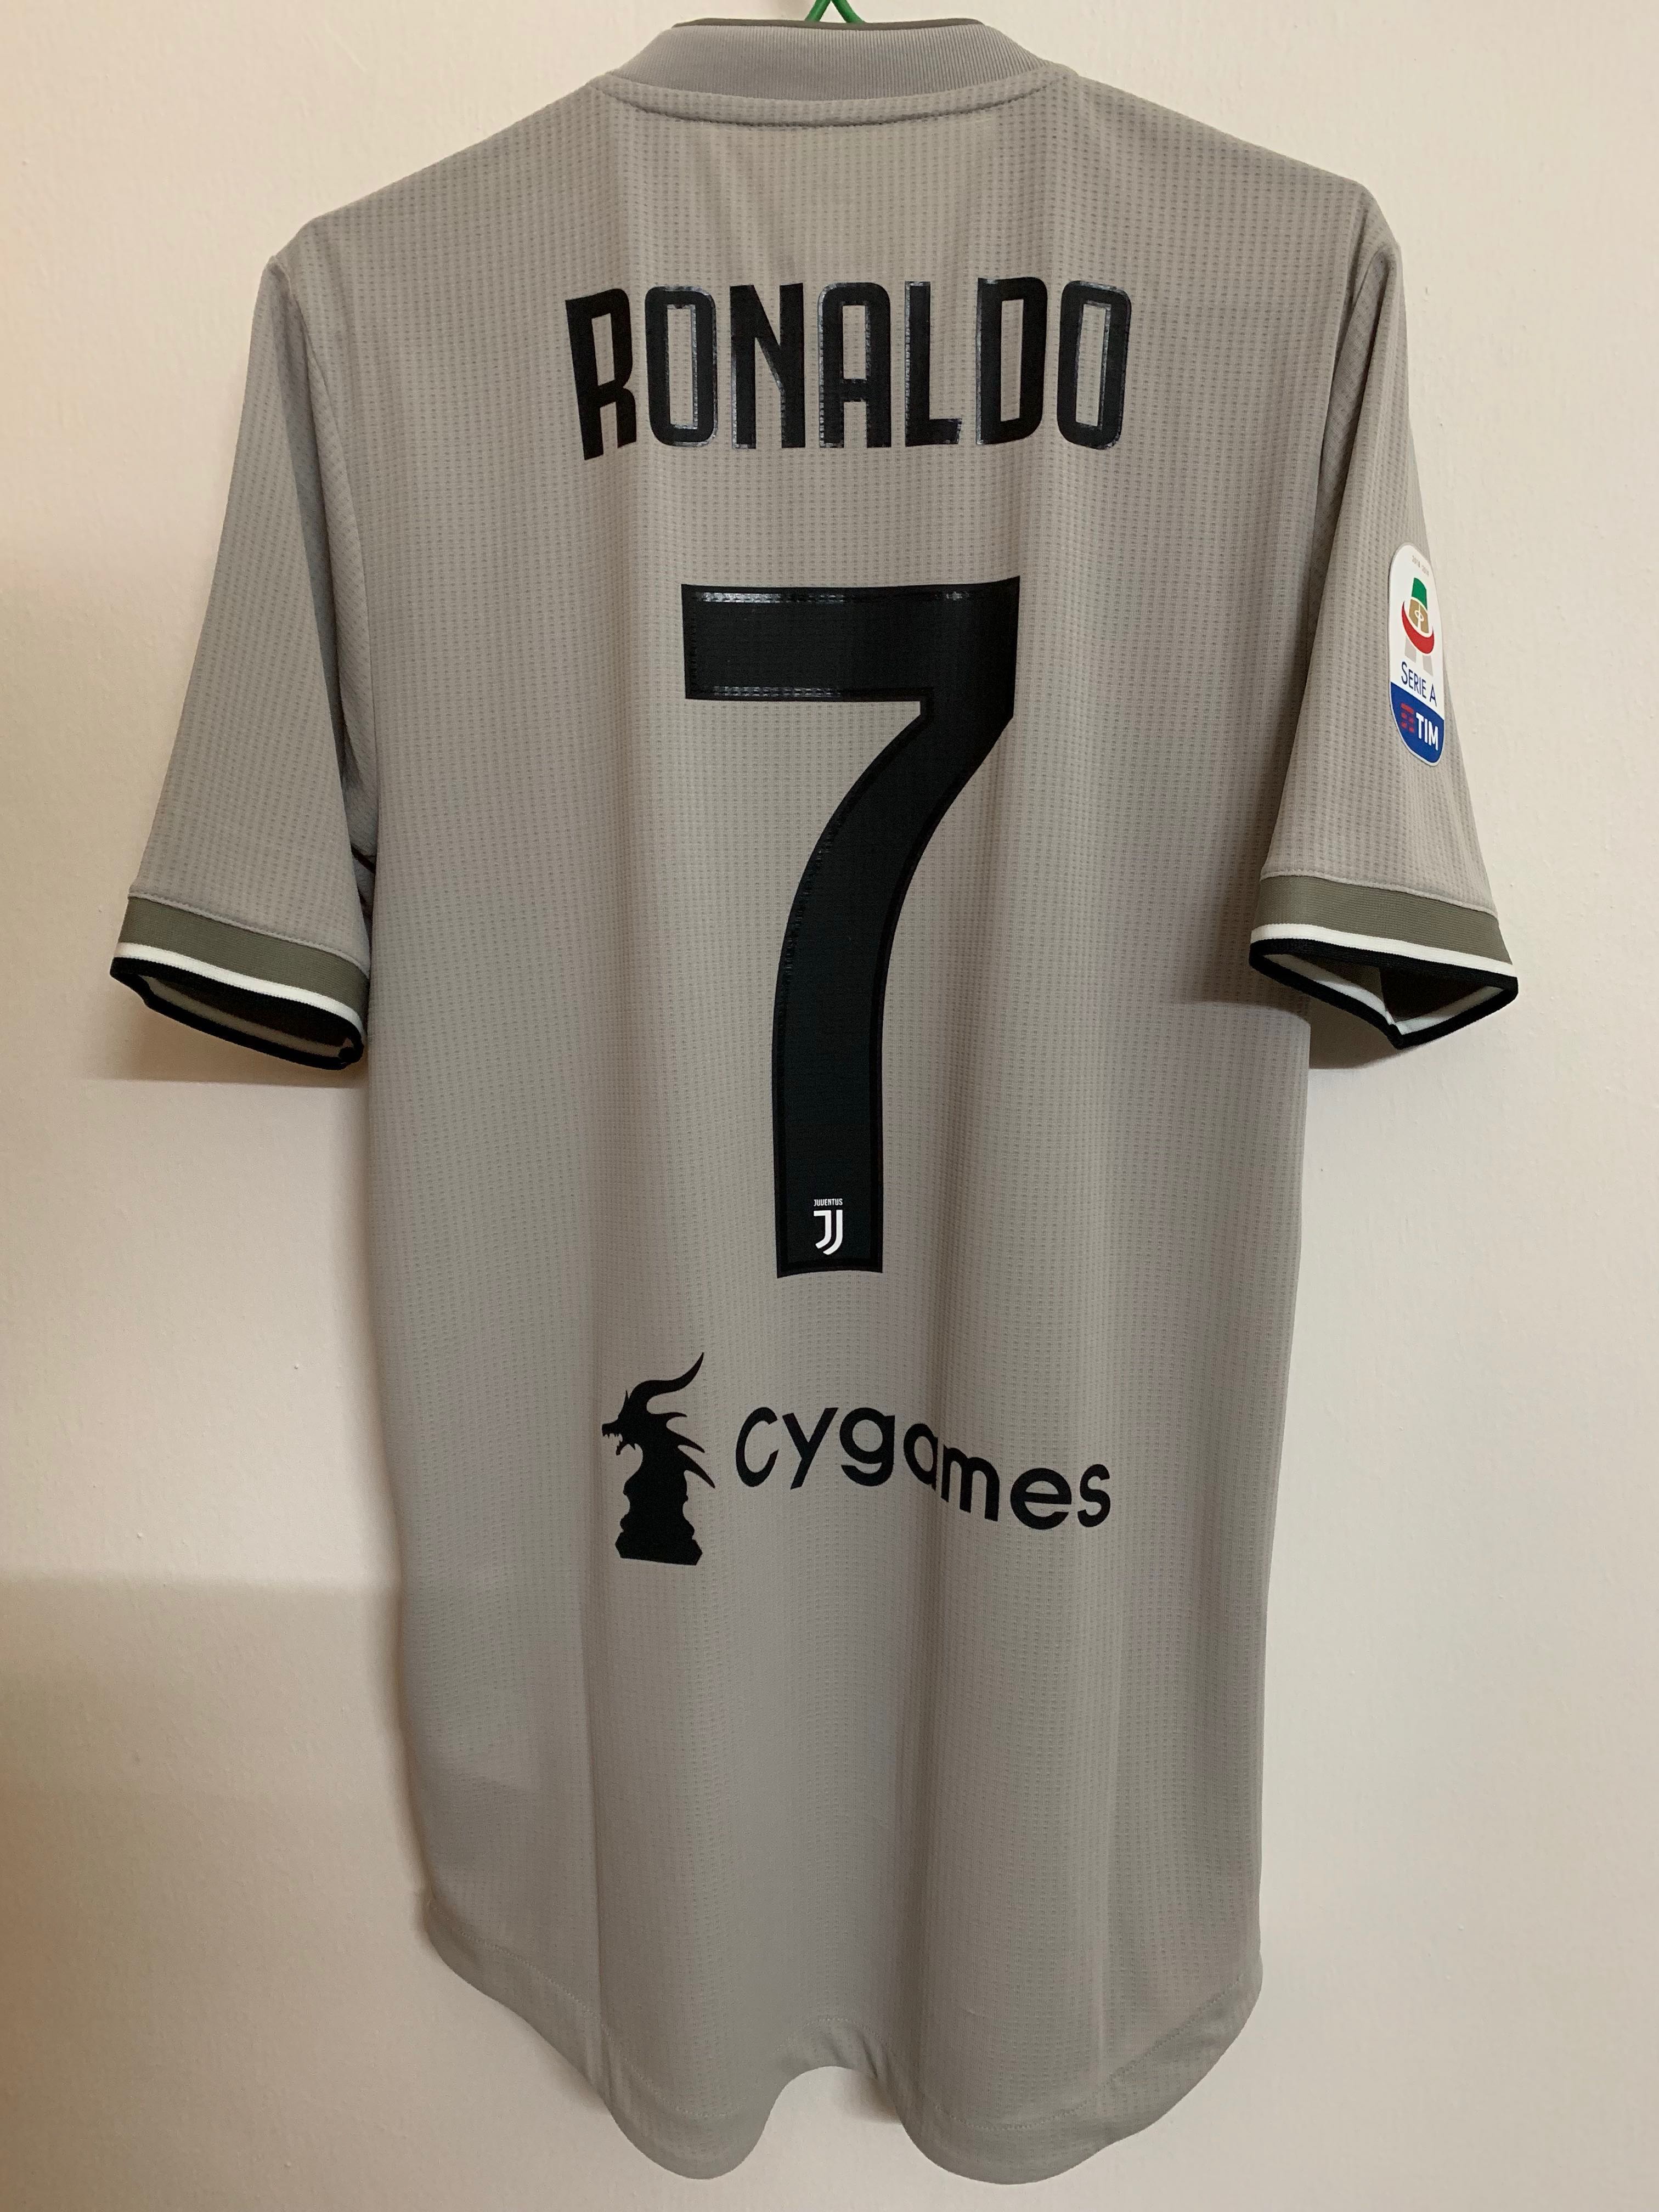 Official Adidas Authentic Juventus 2018 2019 Away Climachill Player Version Match Jersey Ronaldo 7 Cr7 Serie A Ucl Shirt Sports Sports Apparel On Carousell